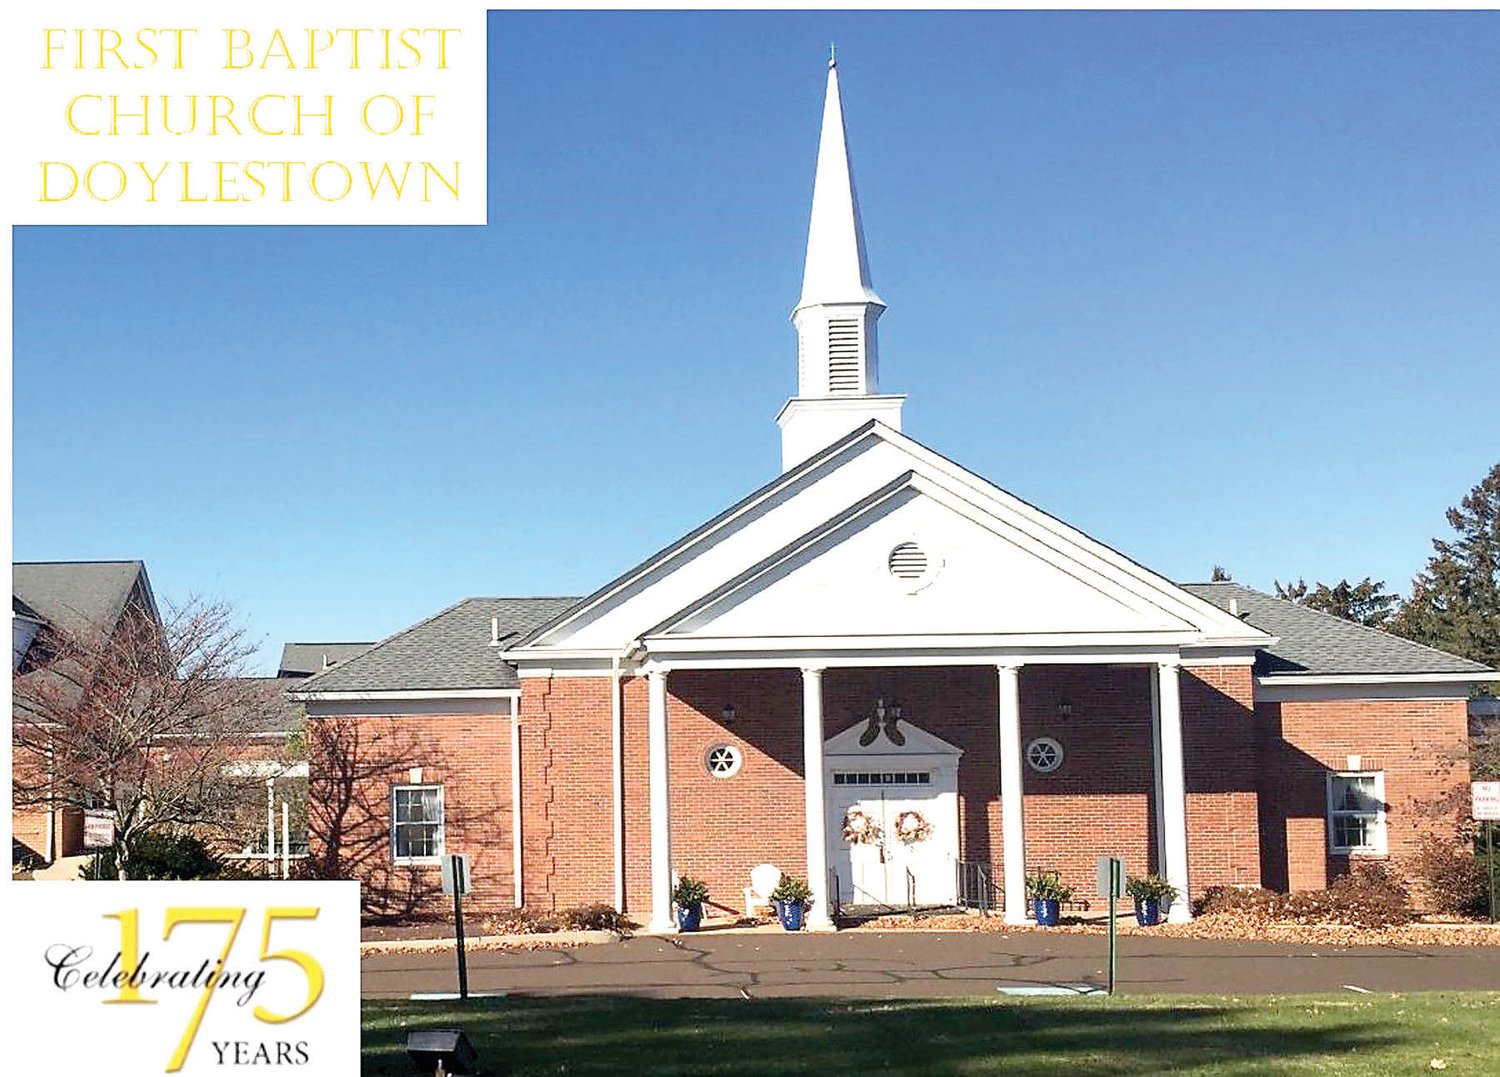 The current First Baptist Church building is located at 311 W. State St., Doylestown.